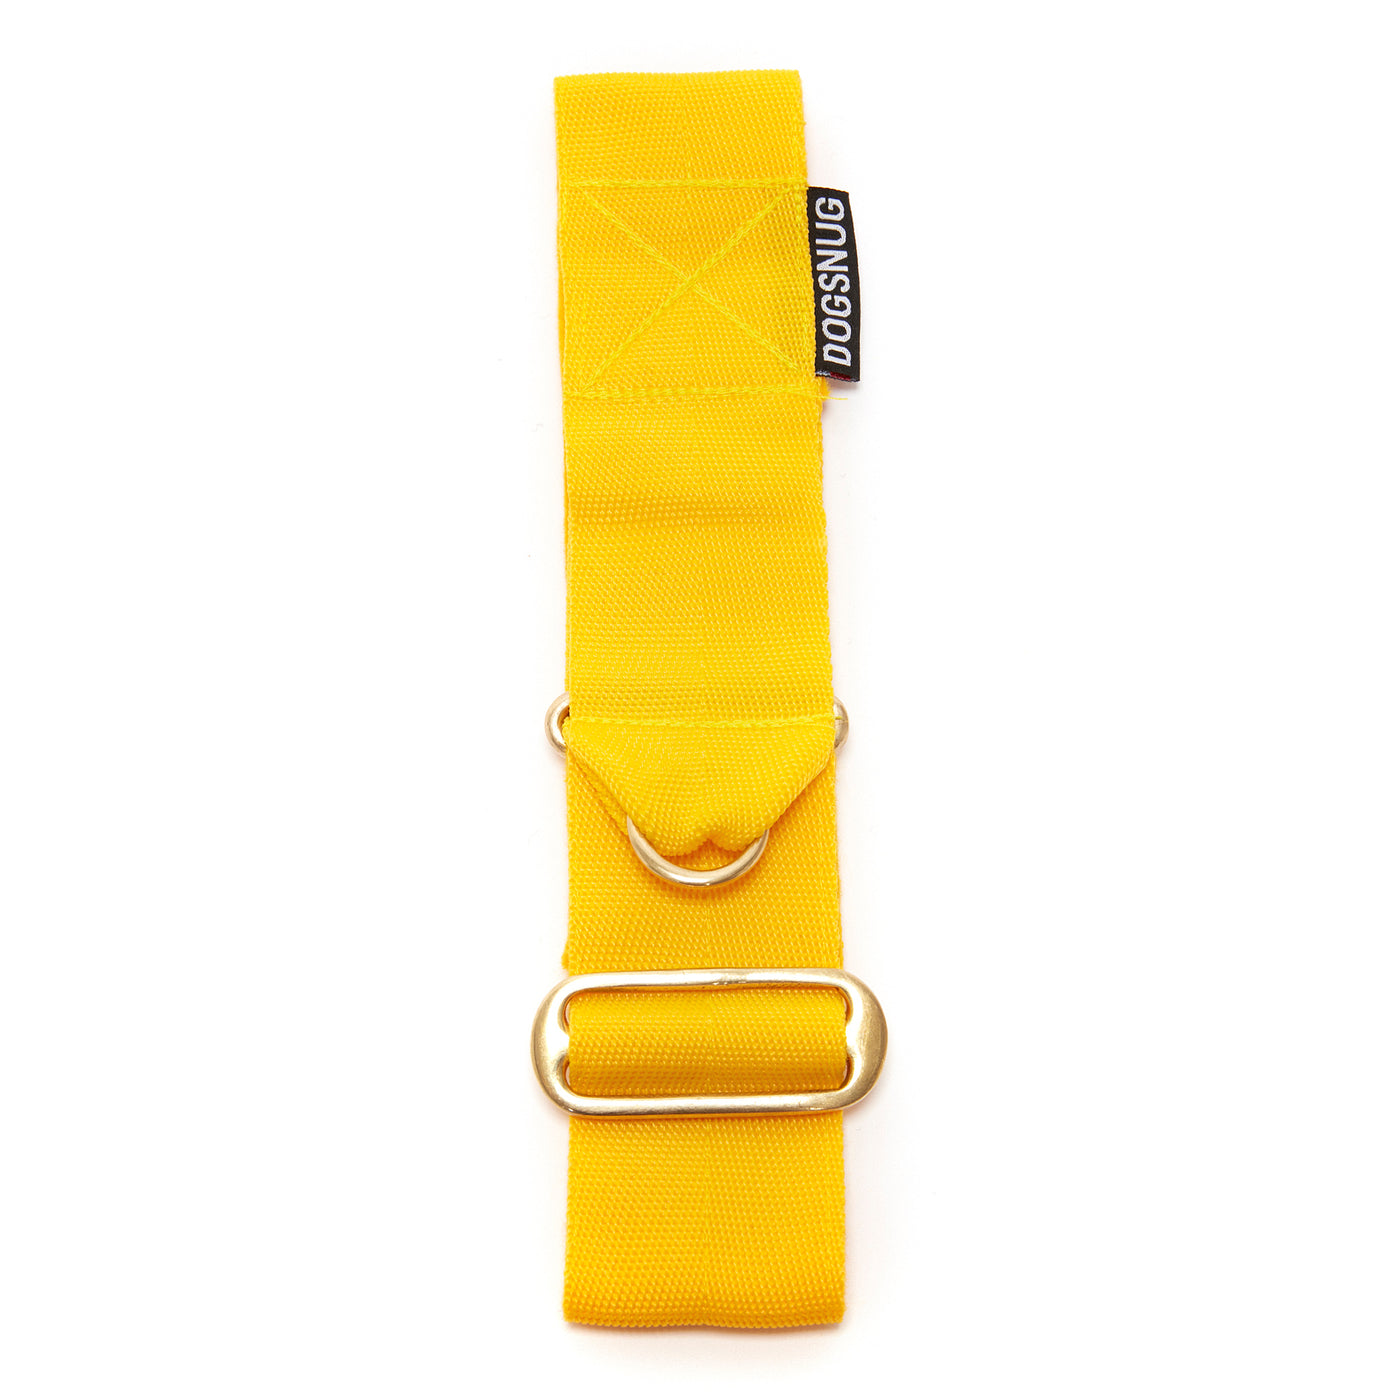 Wide martingale dog collar in yellow